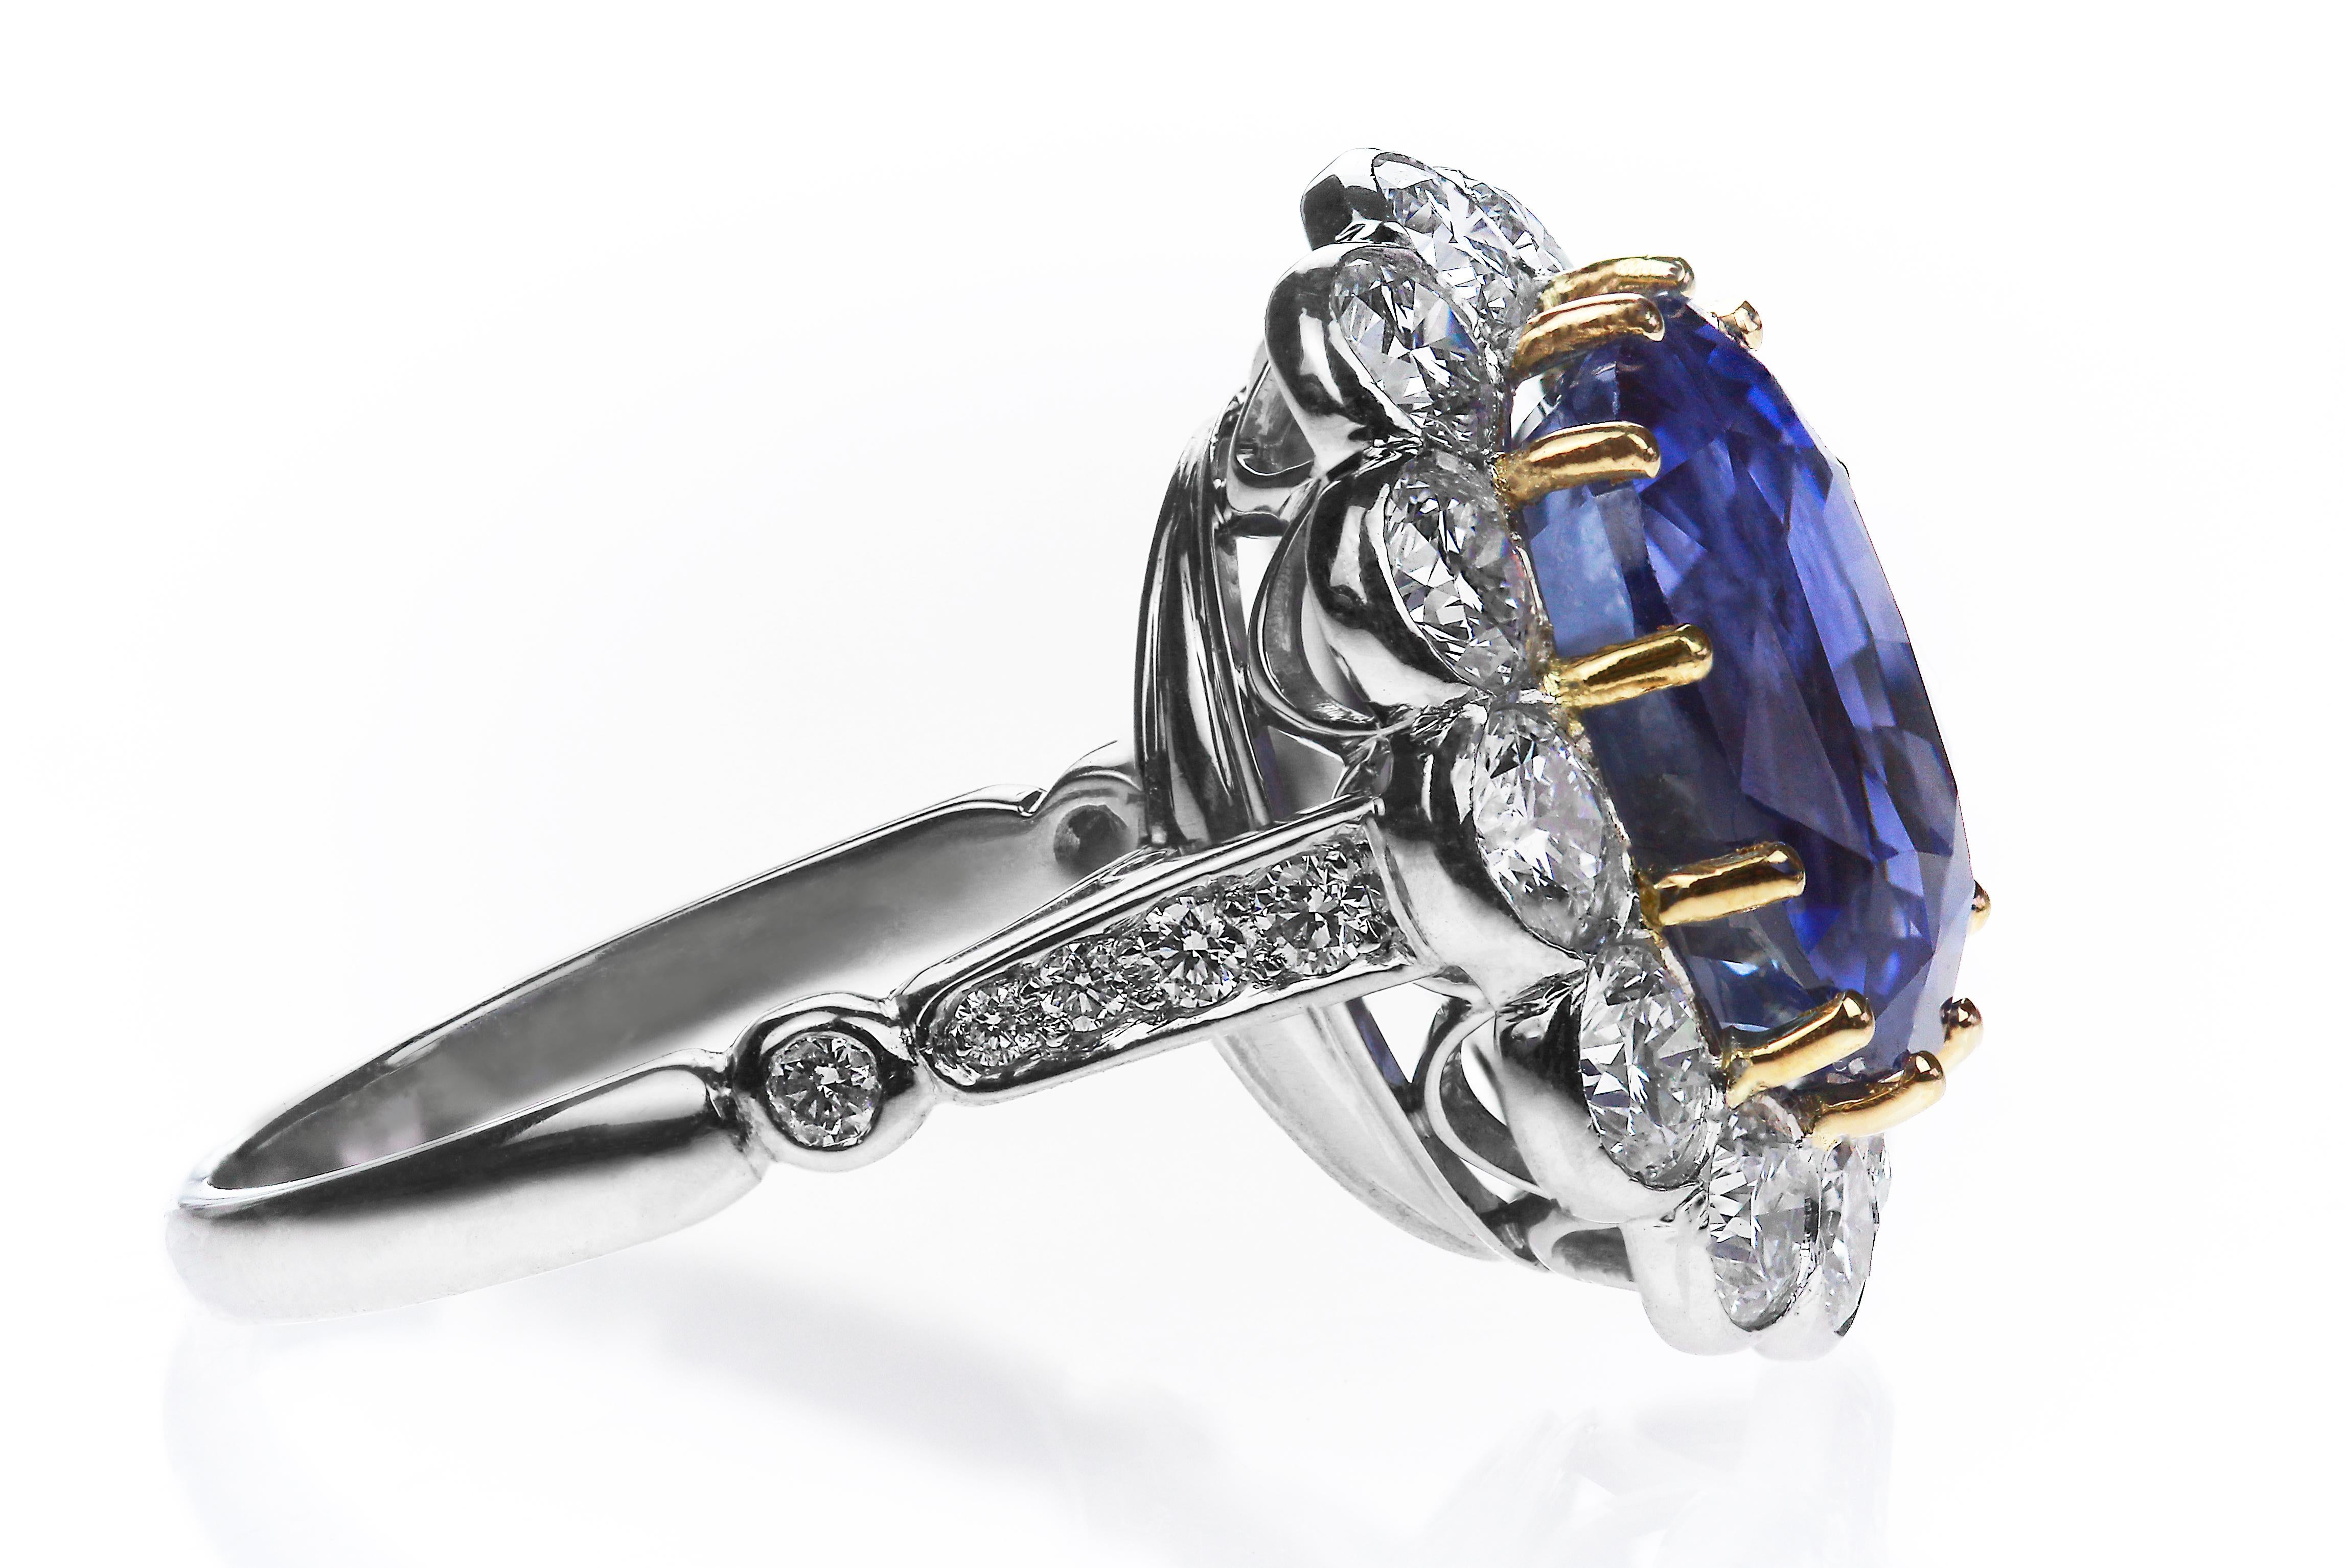 Certified natural untreated sapphire 9.22 ct and diamond ring set in platinum and yellow gold claws to complement the sapphire. 
Exquisite sapphire hue of blue perfectly complements shining diamonds. Cushion cut sapphire 9.22 carats with certificate